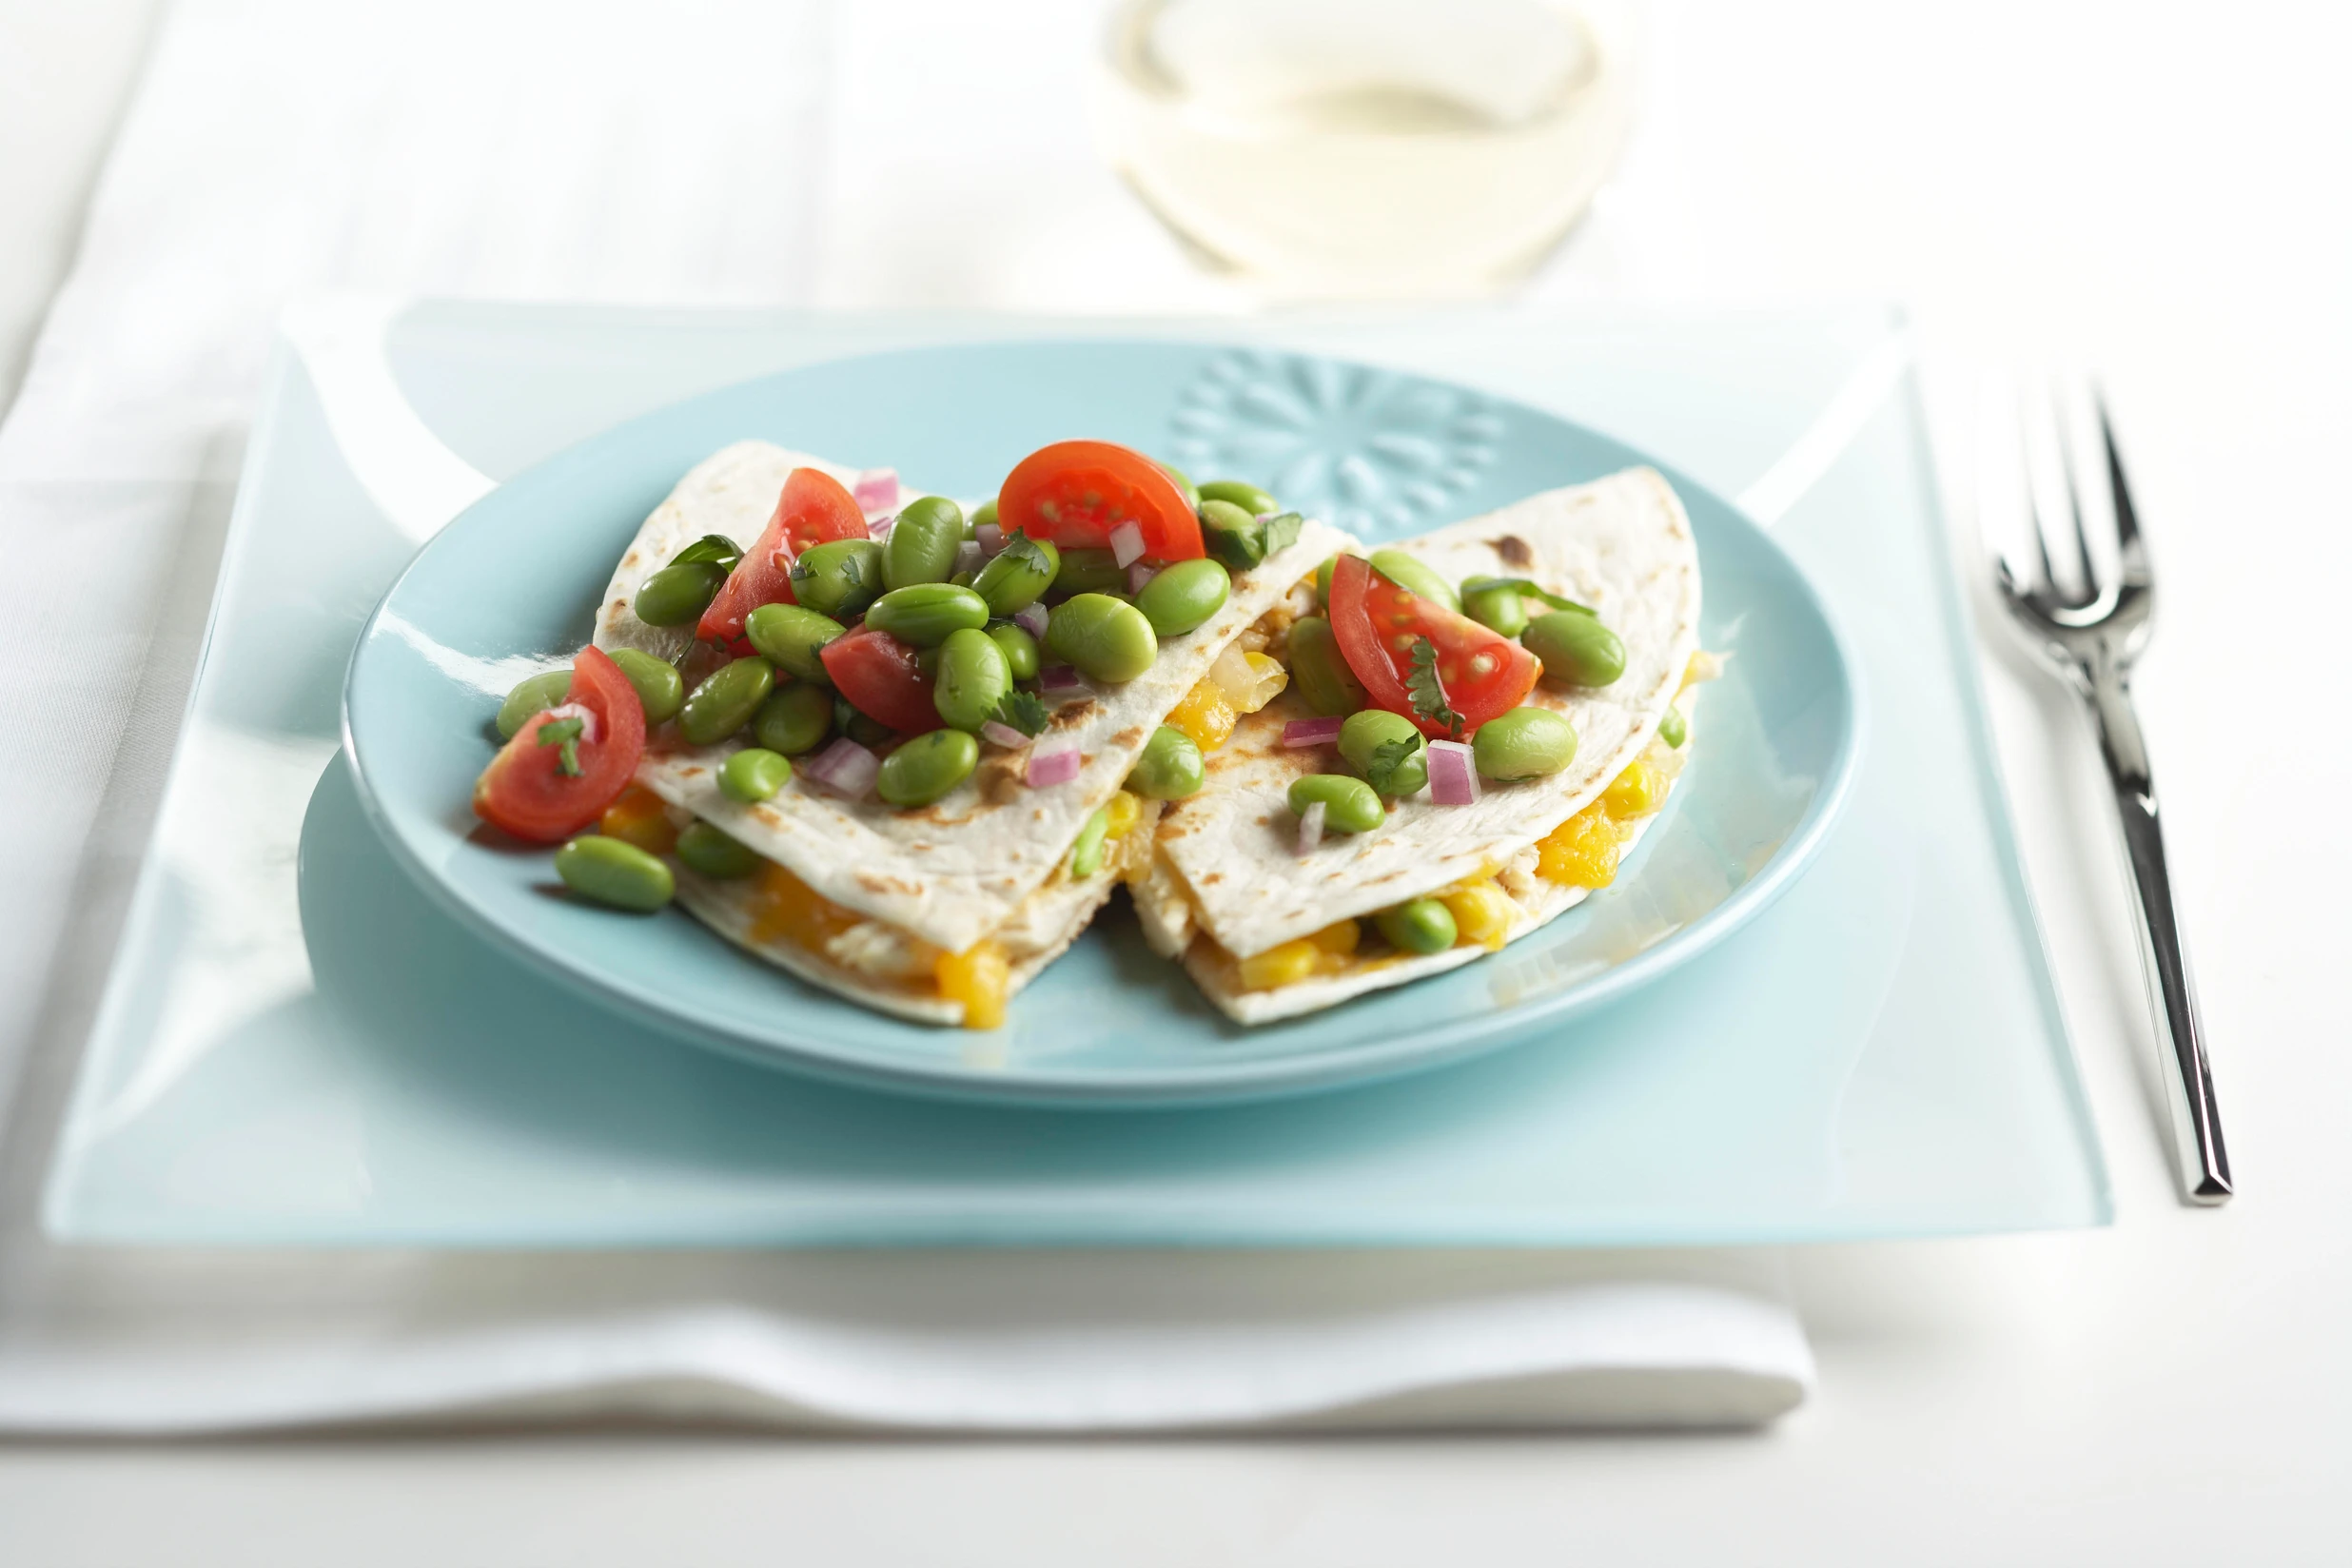 Chicken and Cheese Quesadillas with Edamame Salad Topping